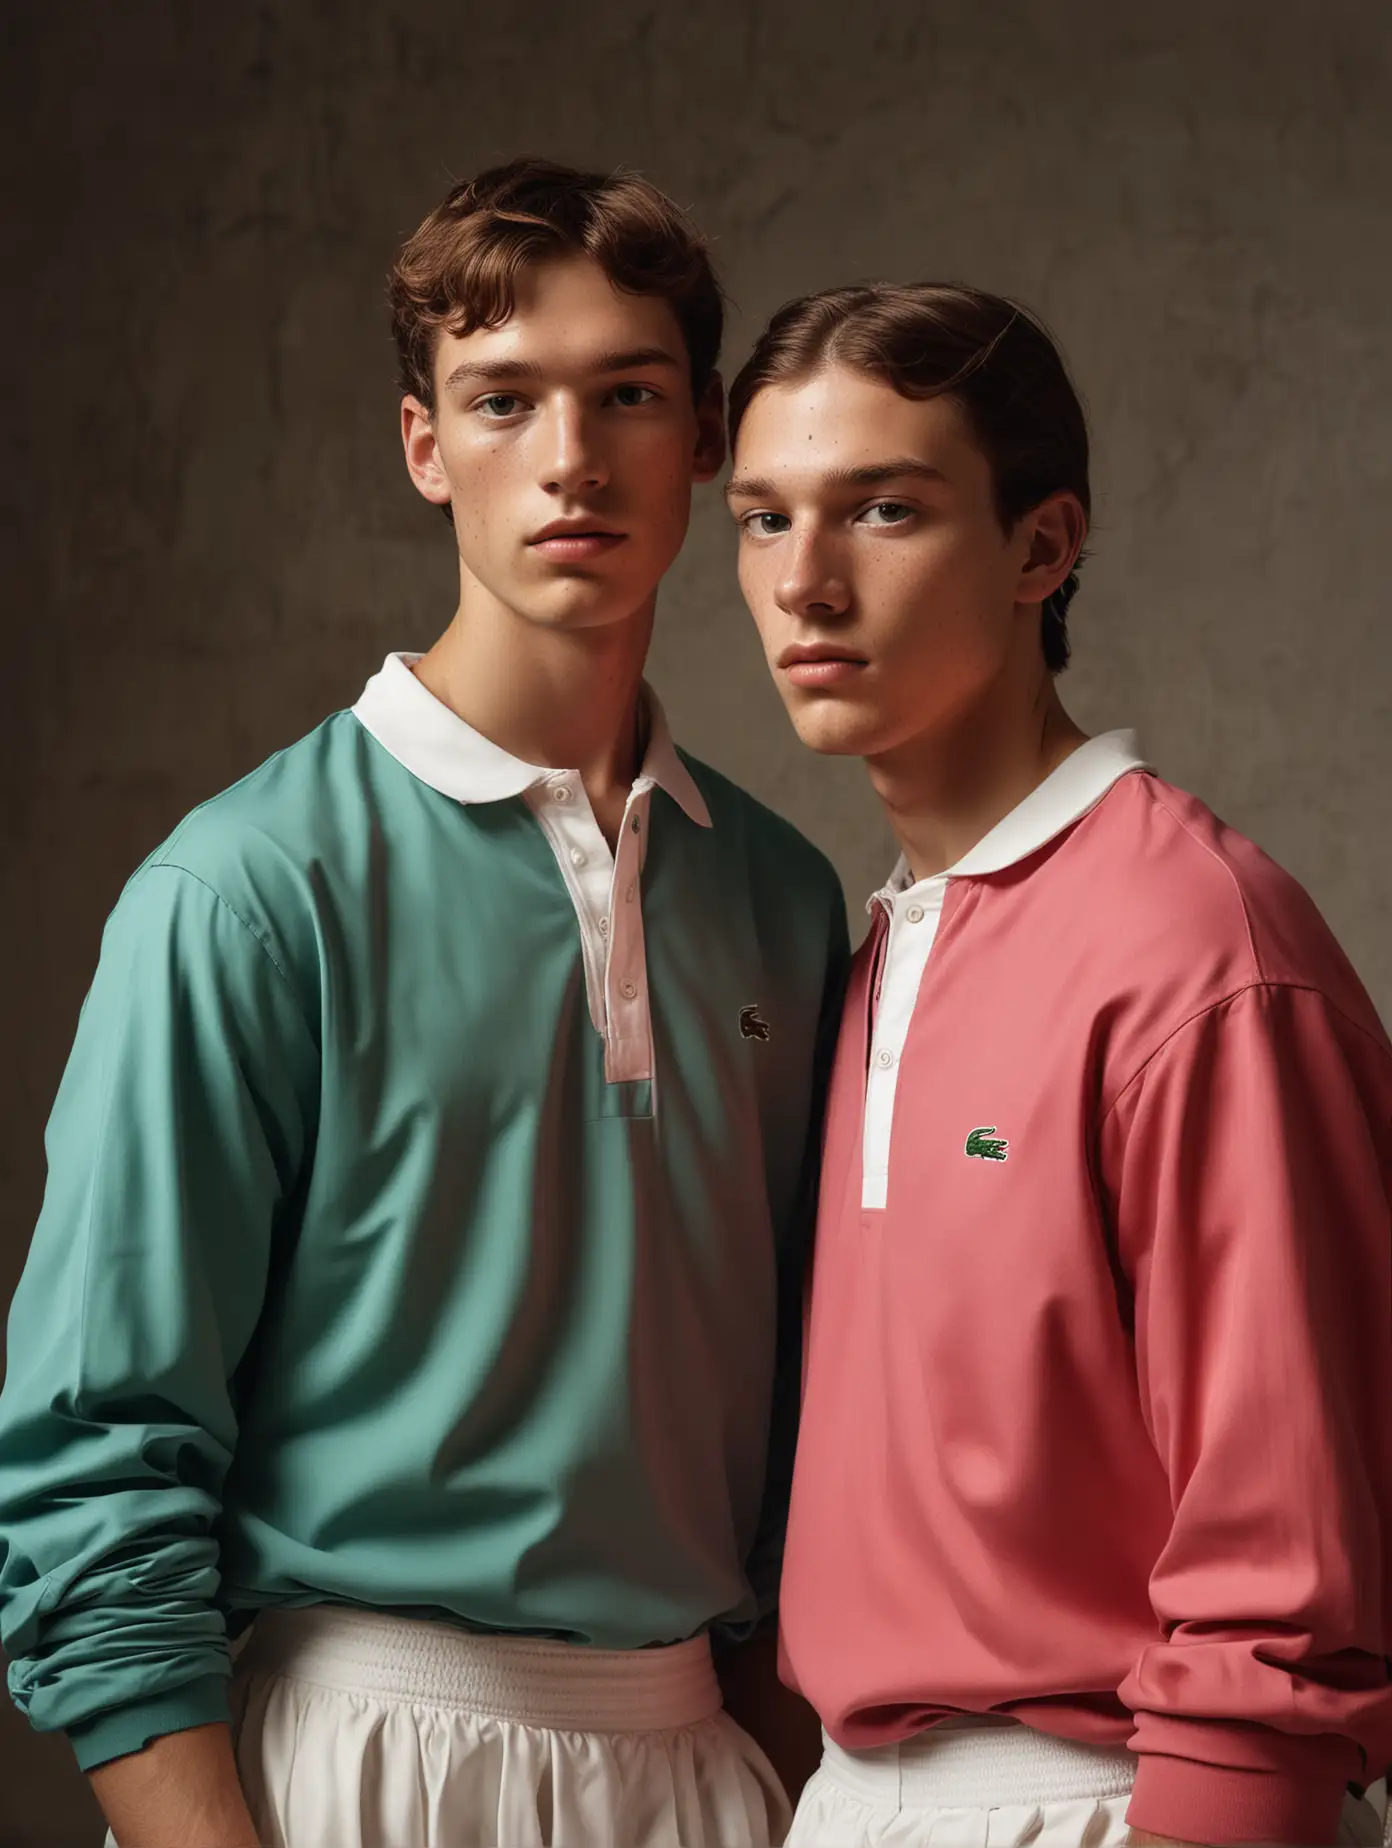 Renaissance Style Male Models Posing in Lacoste Outfits